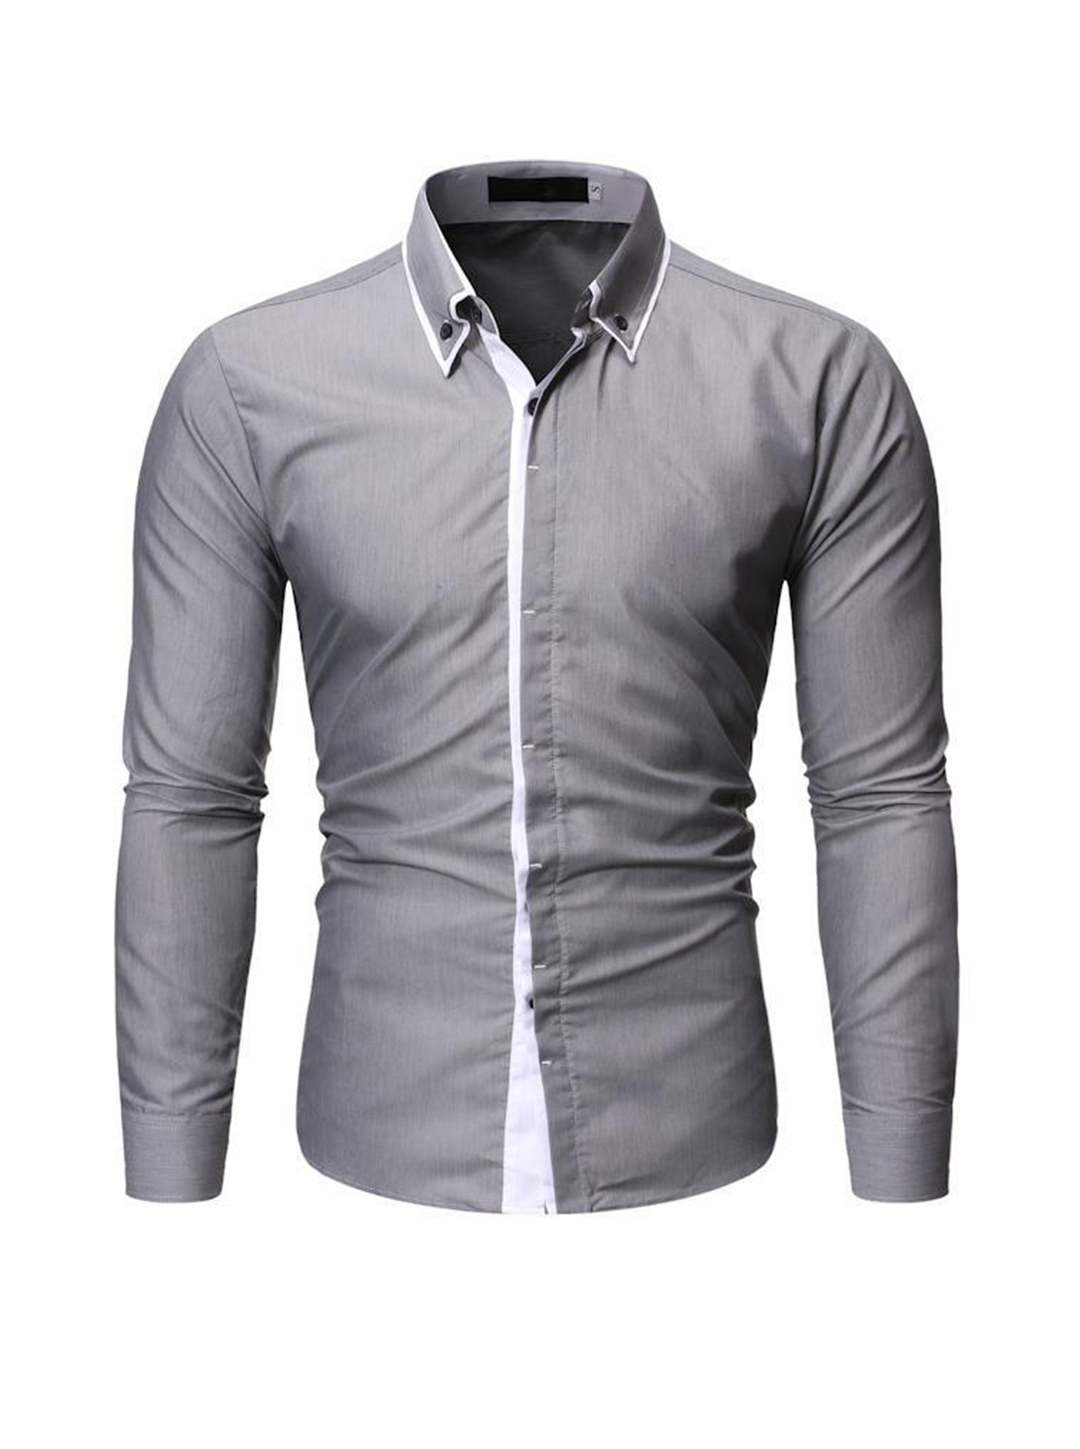 Andrew Contrasting Colors Casual Shirt